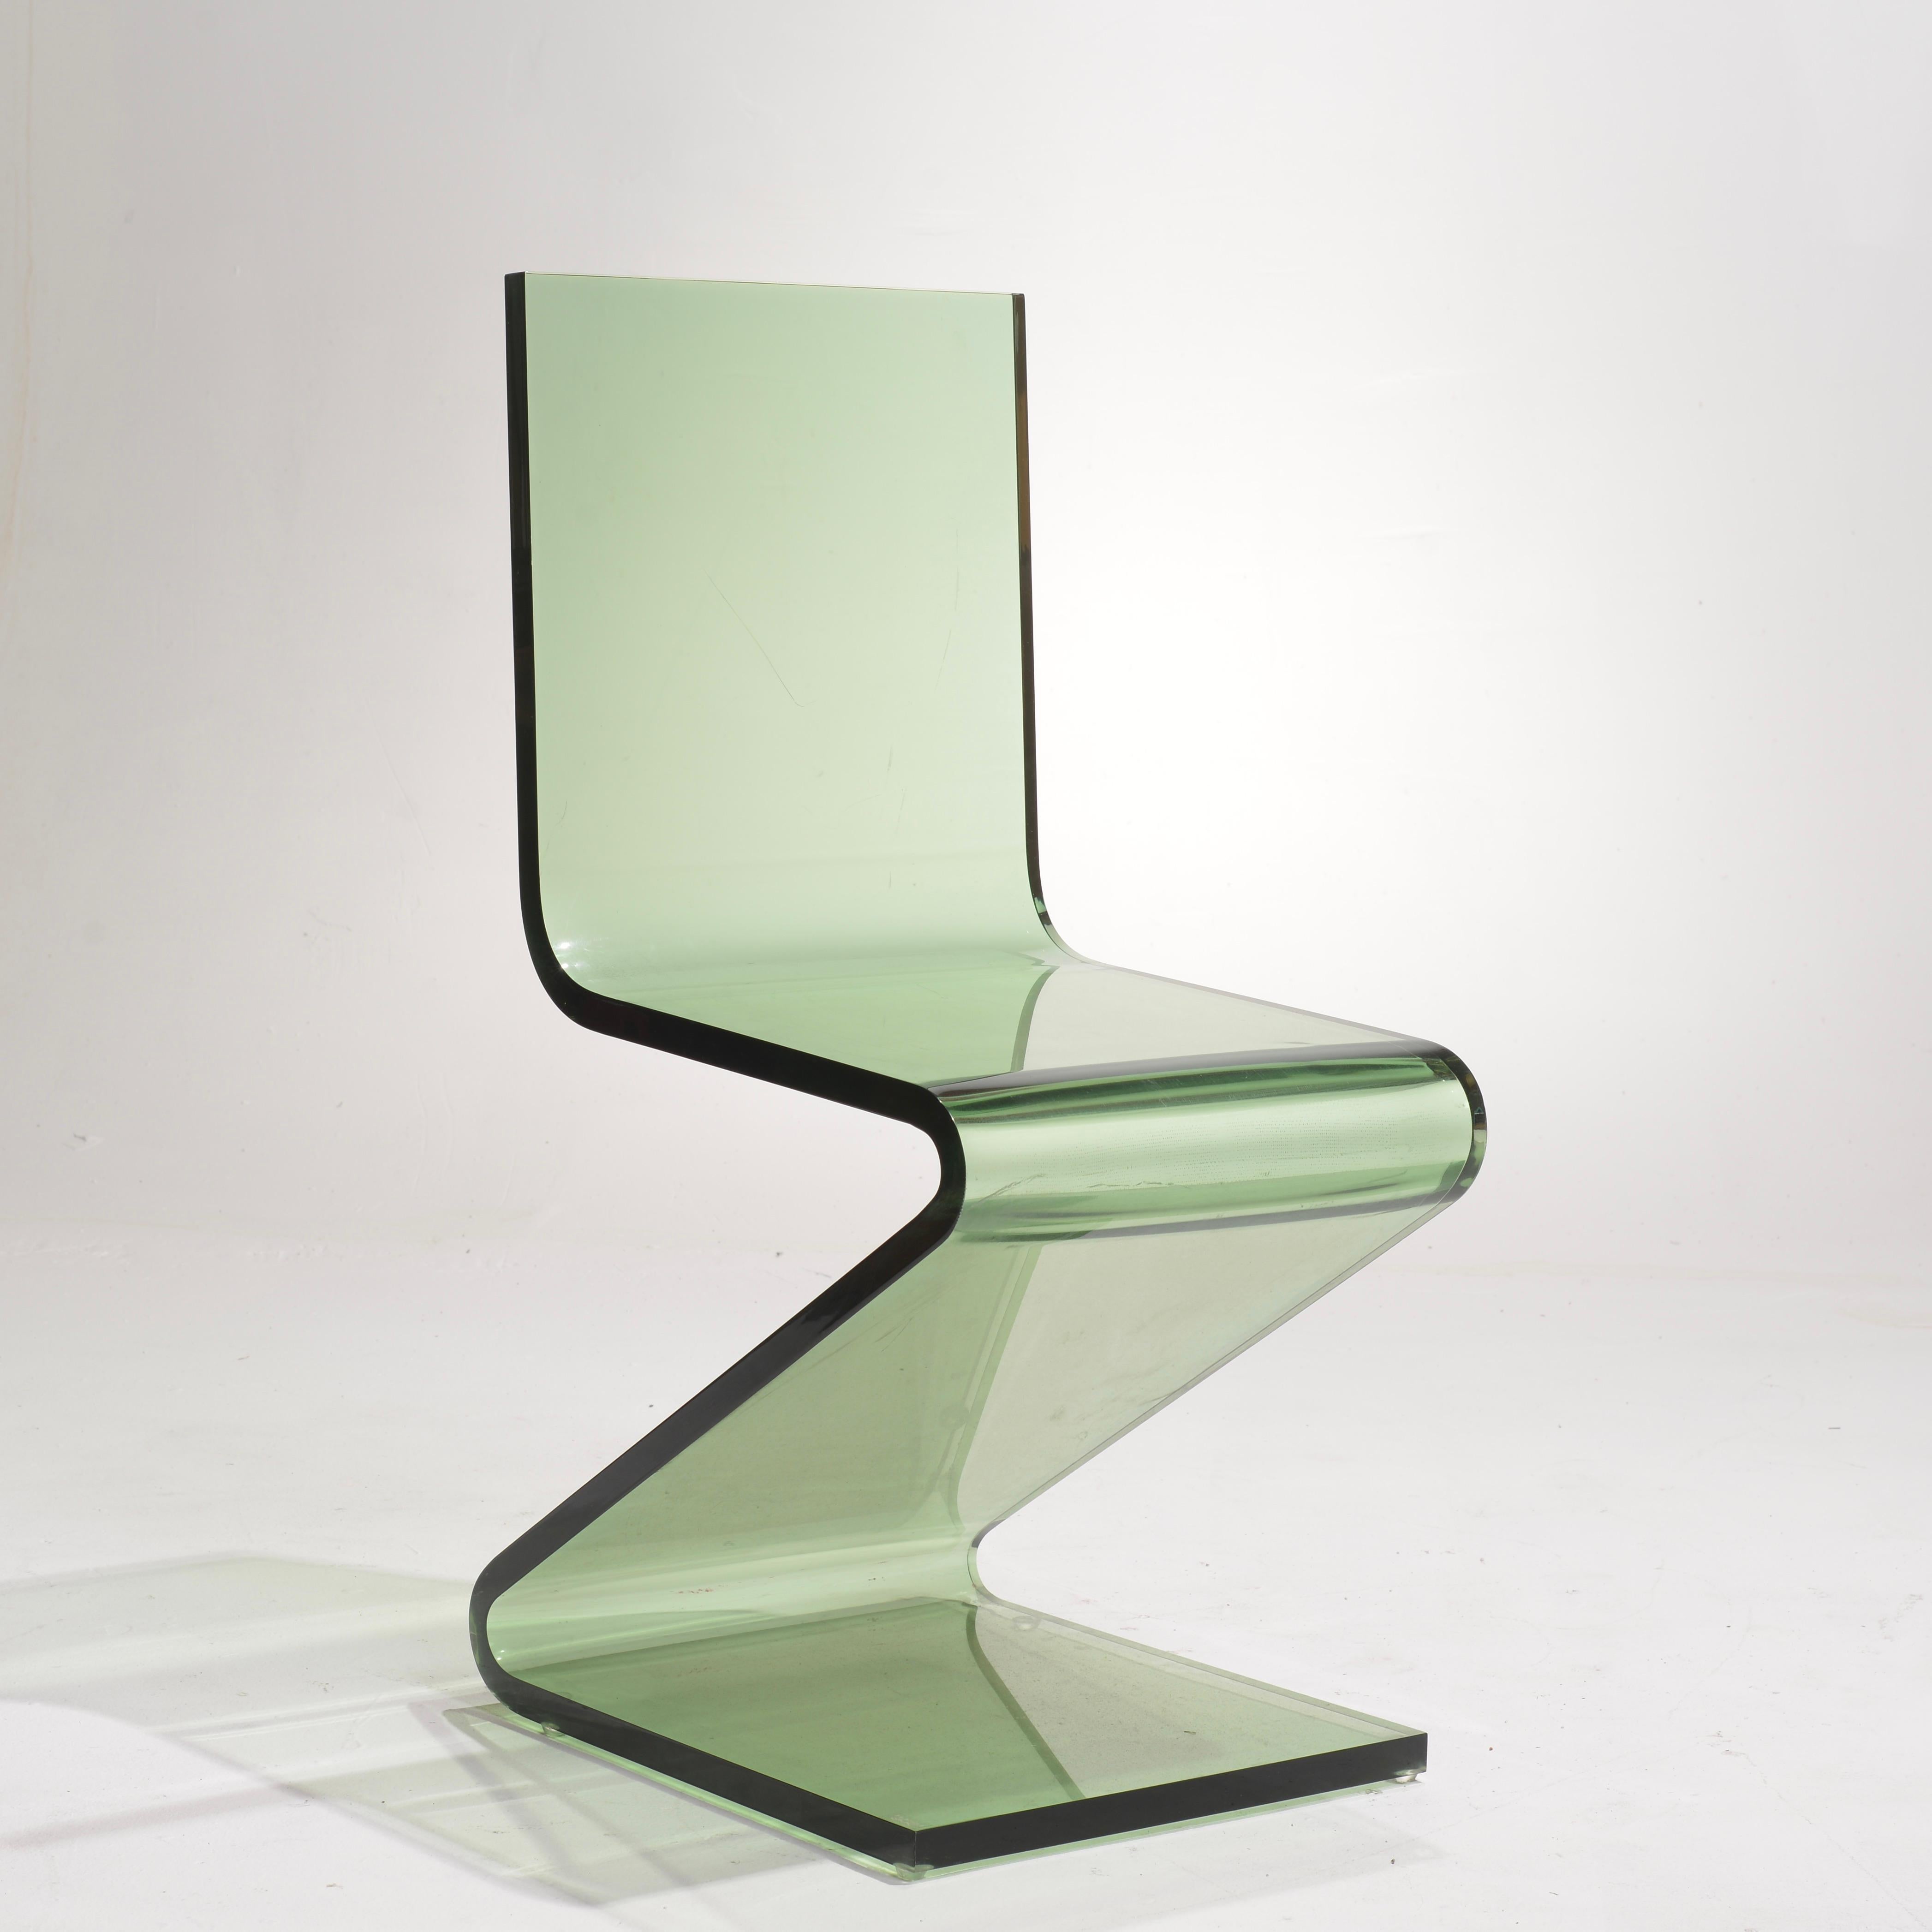 Vintage Lucite Z Table and Z Chairs by Shlomi Haziza for H Studio For Sale 7